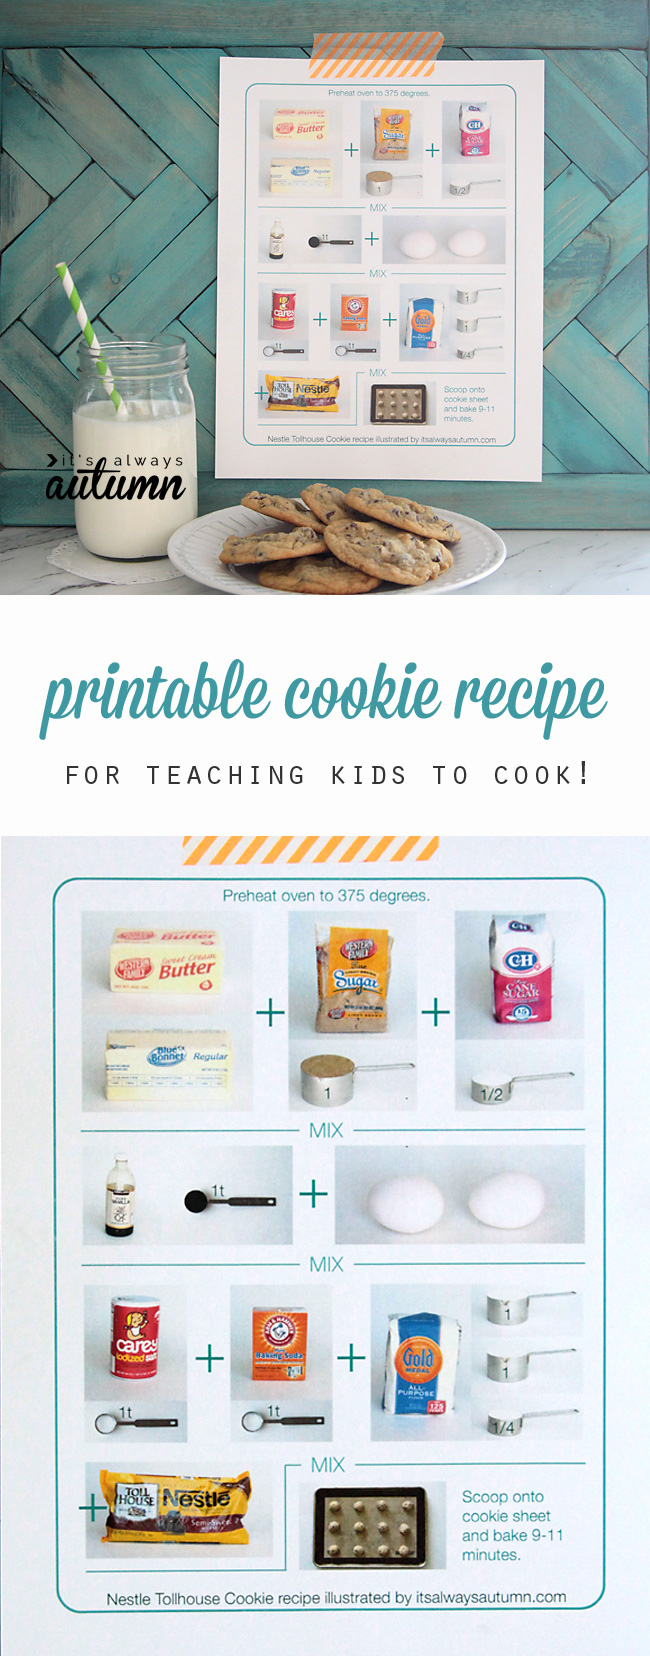 What a fun idea! This printable cookie recipe sheet is perfect for teaching kids how to cook, even if they can't read yet.